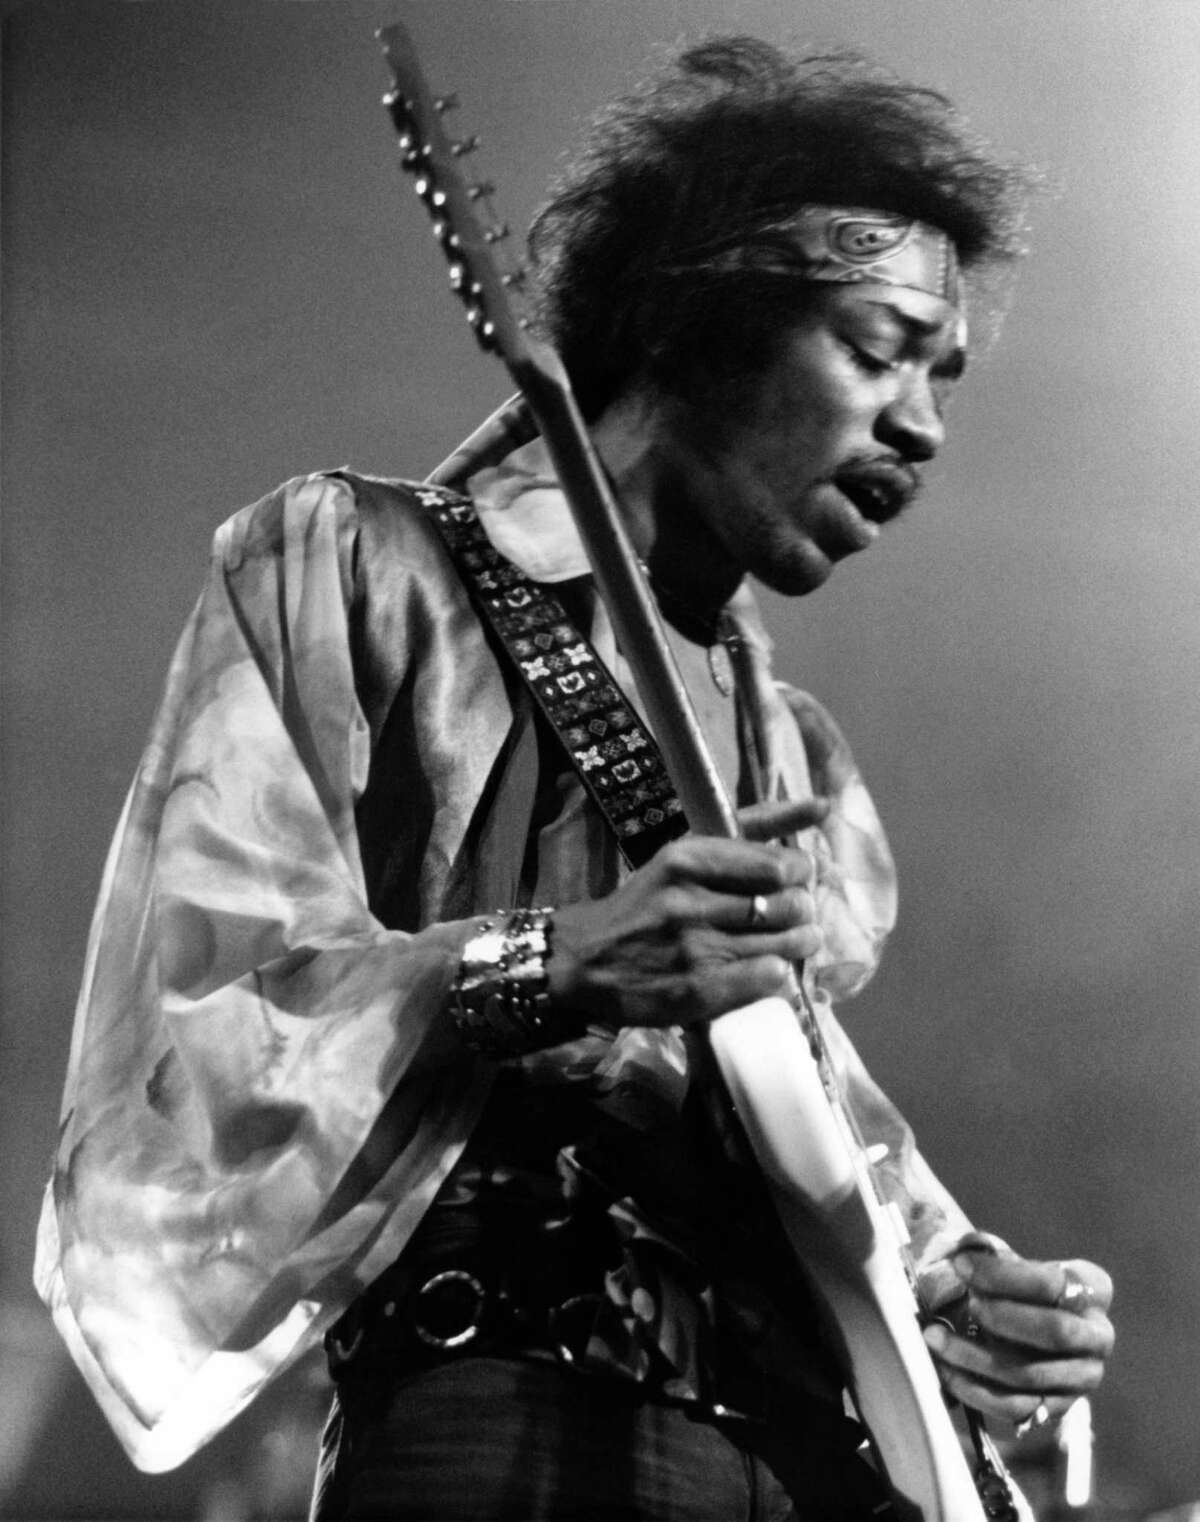 Jimi Hendrix, 1942-1970. Keep clicking to see what he, and other rock legends, would look like if they were still alive today.